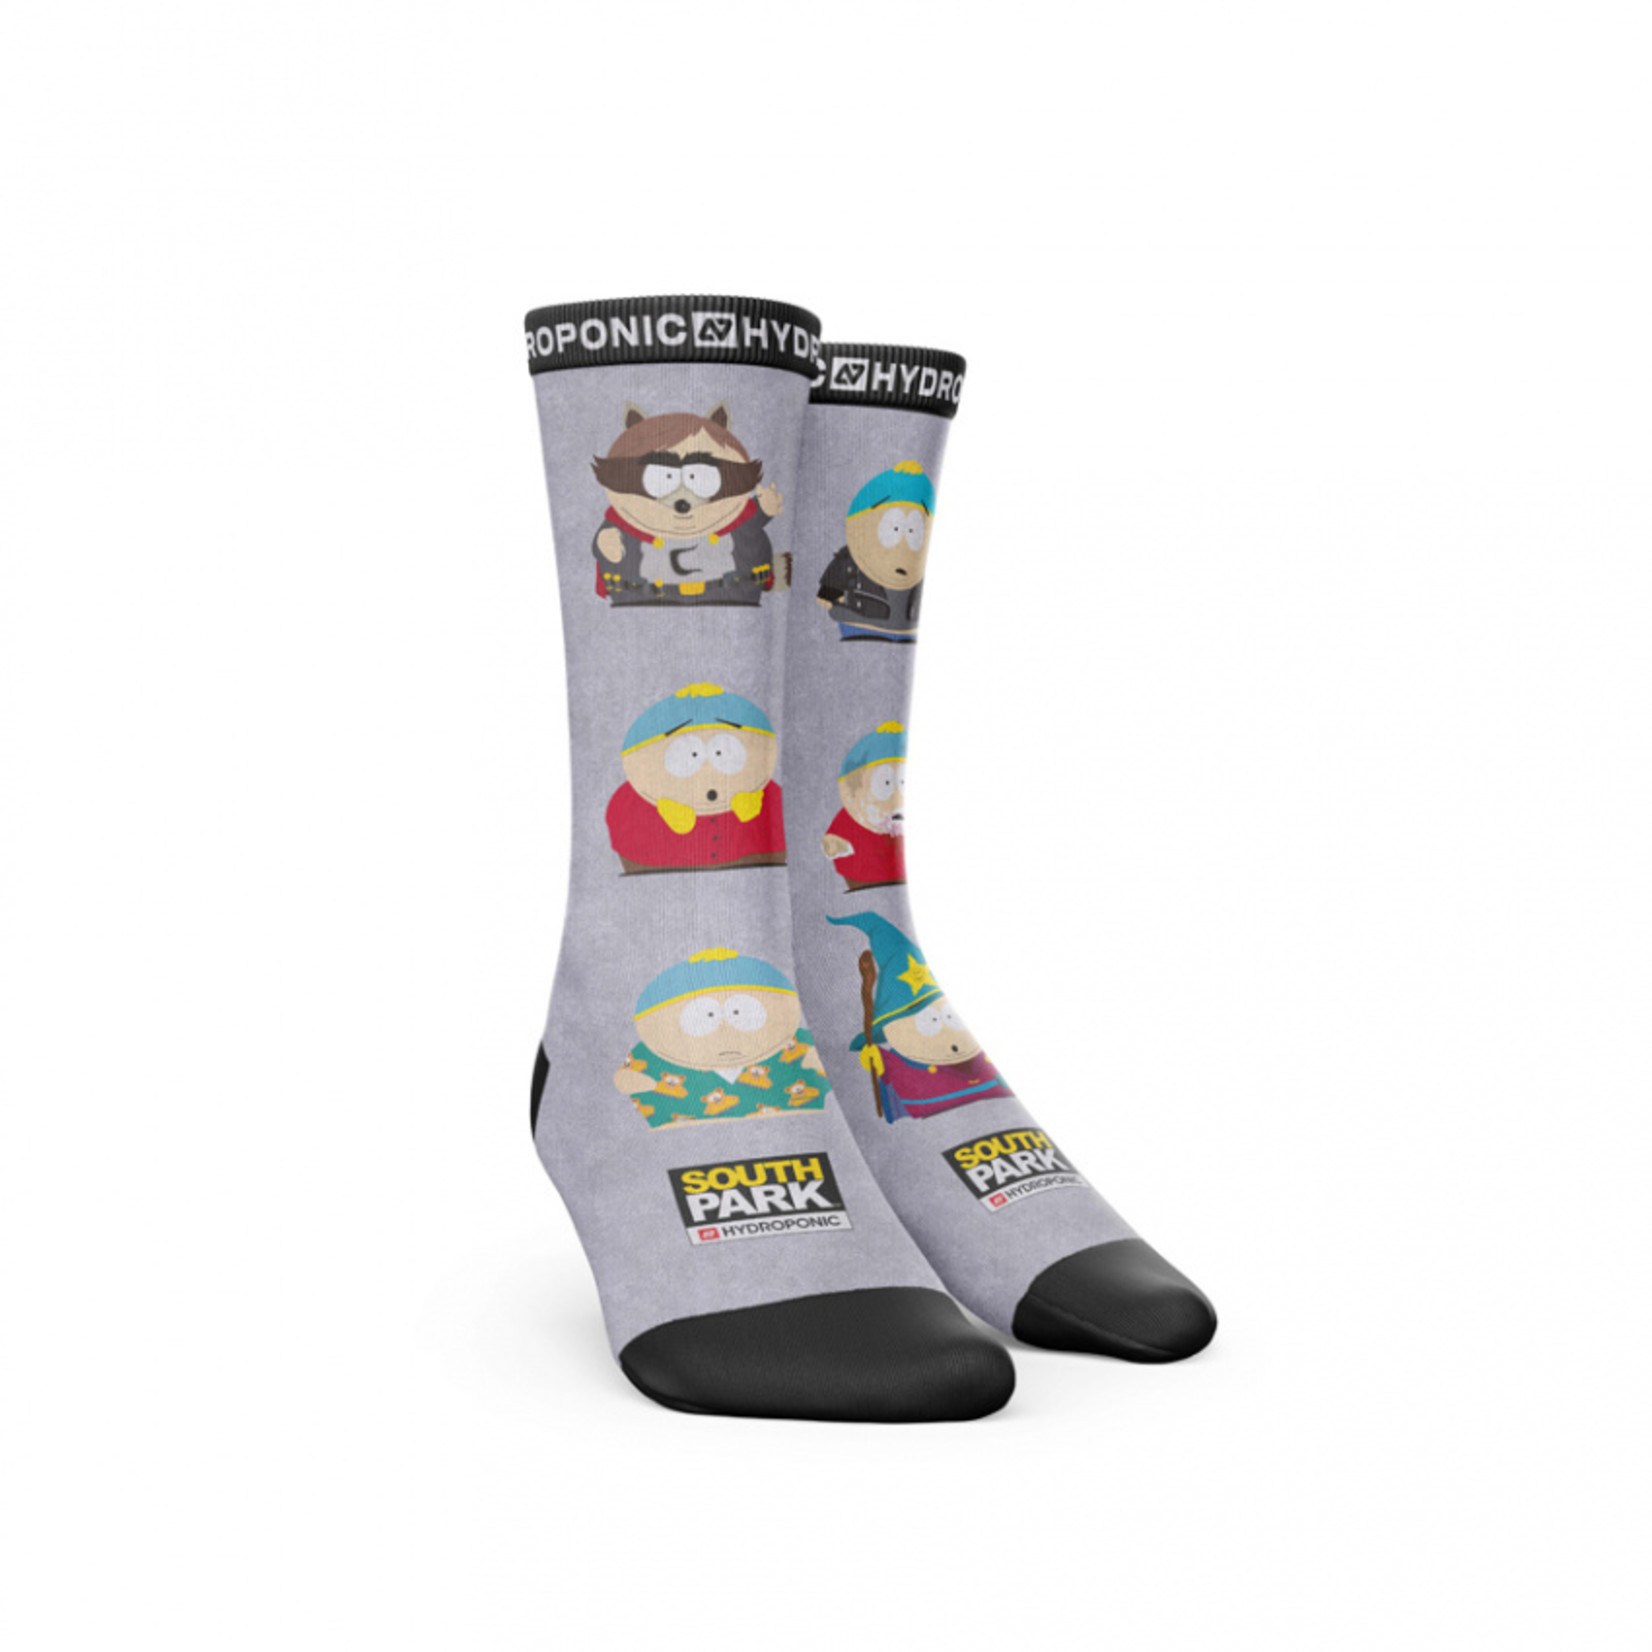 Hydroponic SOUTH PARK COSTUM GREY - Chaussettes - HYDROPONIC